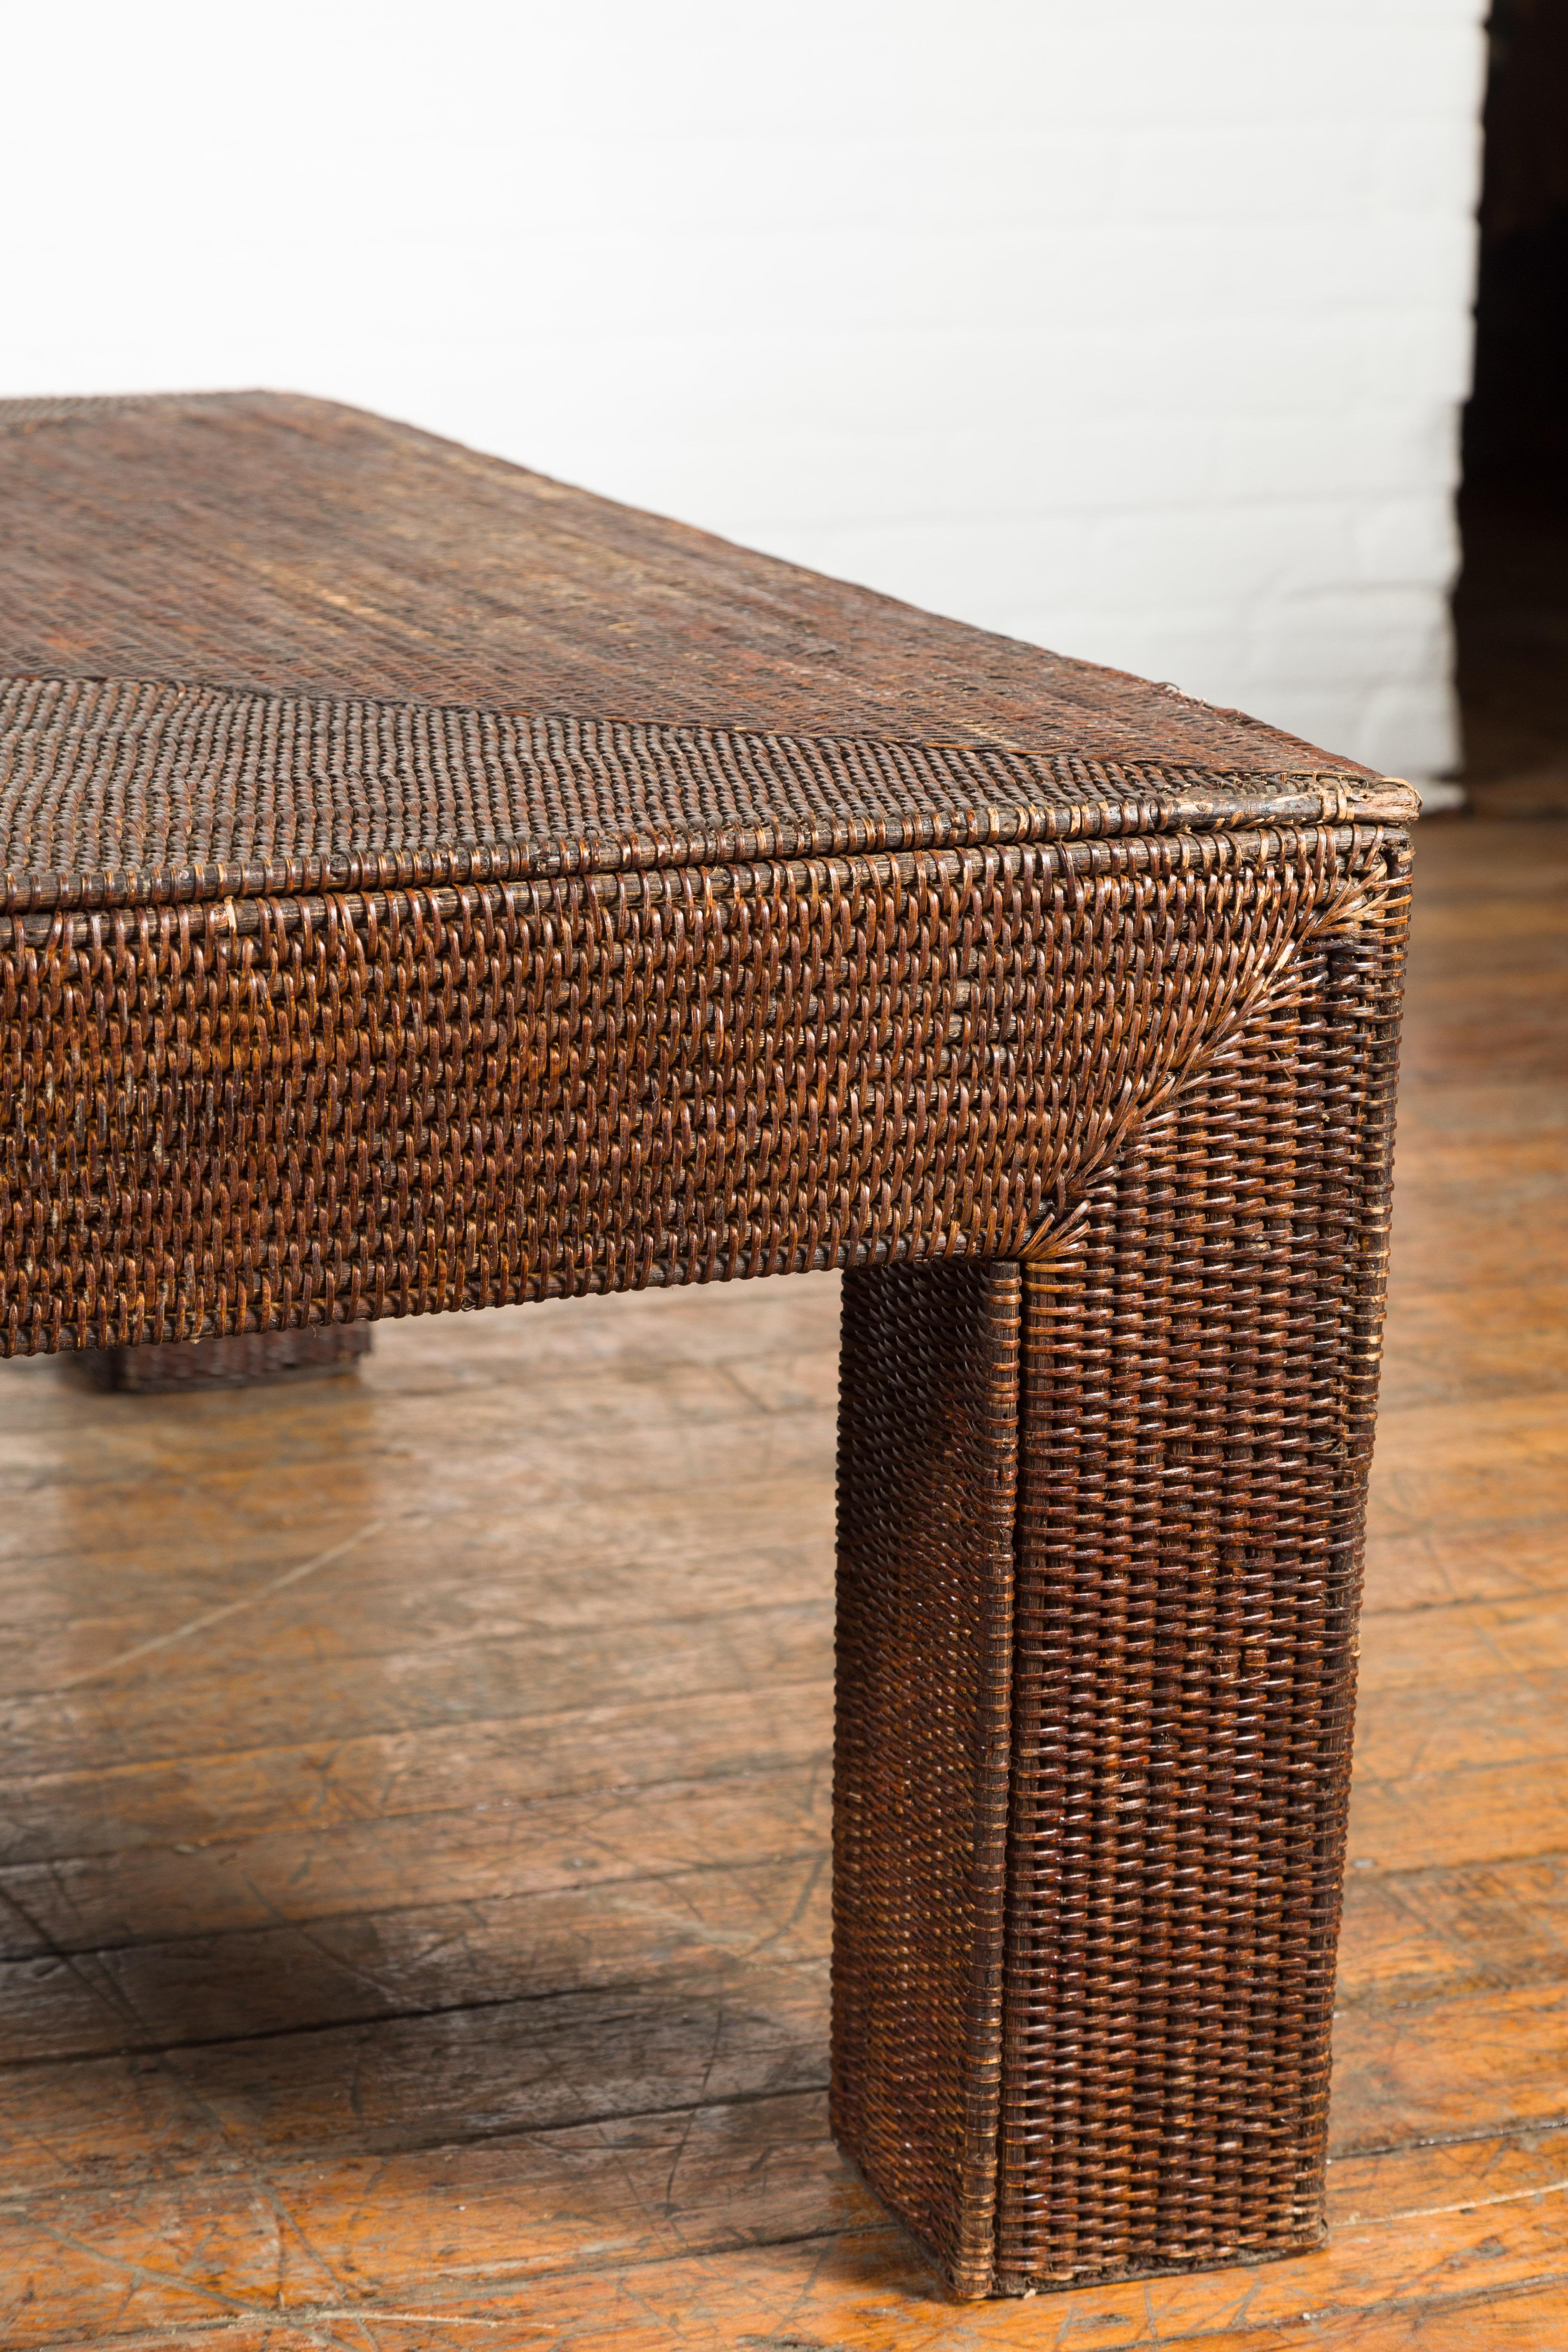 20th Century Burmese Dark Brown Rattan Parsons Leg Coffee Table Hand-Stitched over Wood